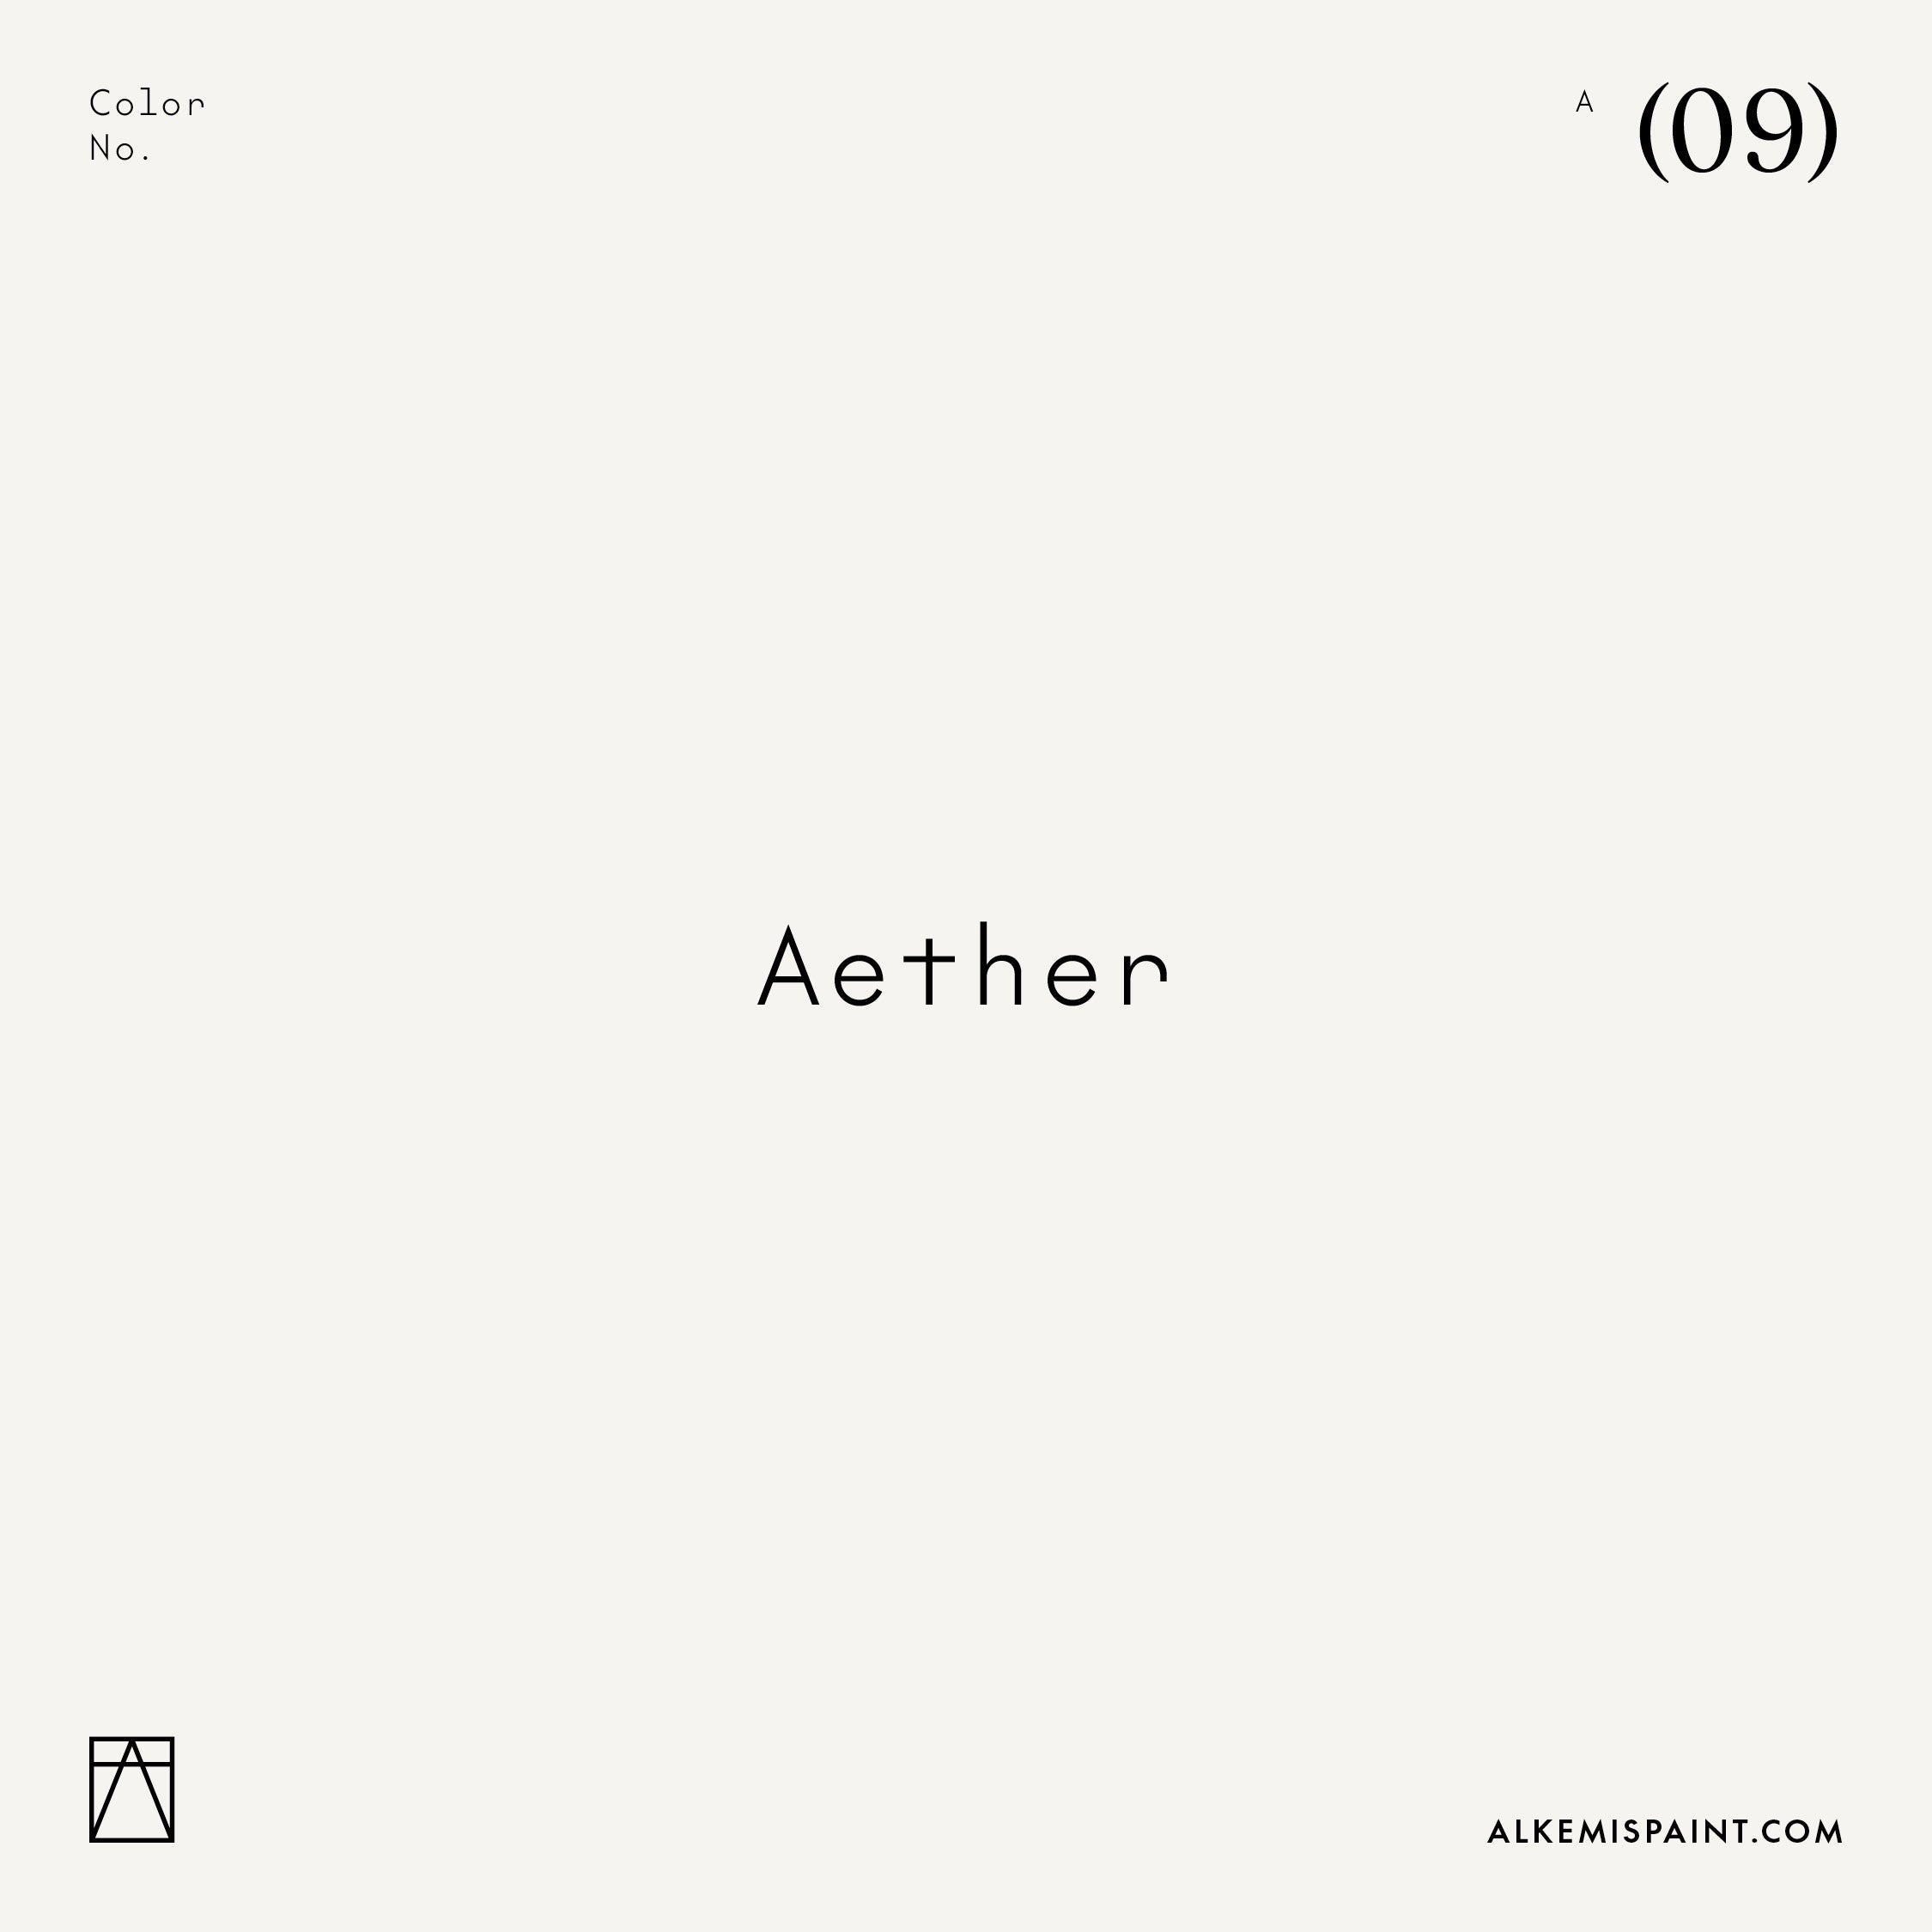 Aether (09)